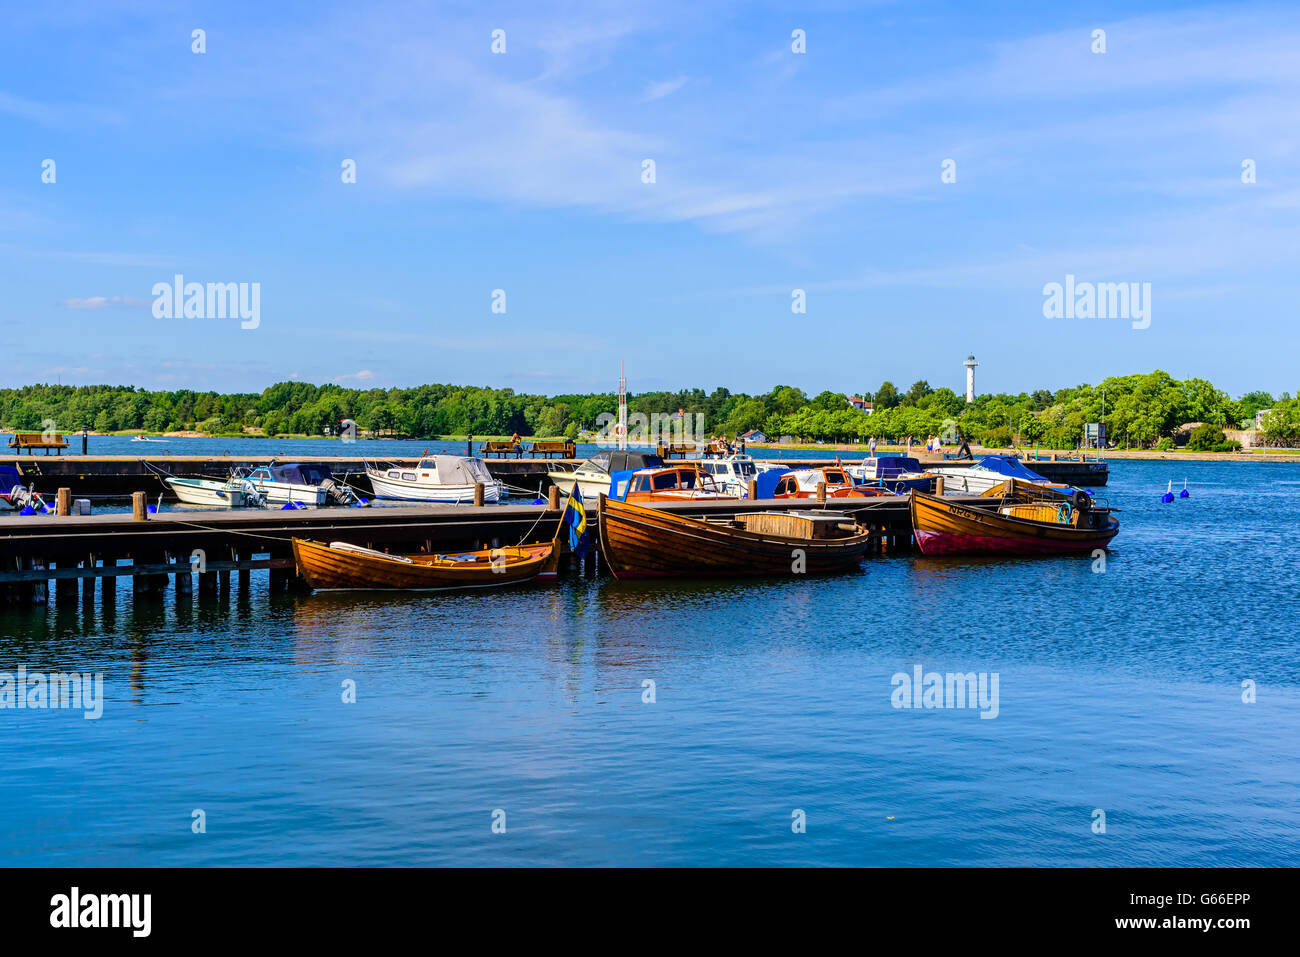 Vastervik, Sweden - June 19, 2016: Old and new boats in a marina with the archipelago and a small lighthouse in the background. Stock Photo